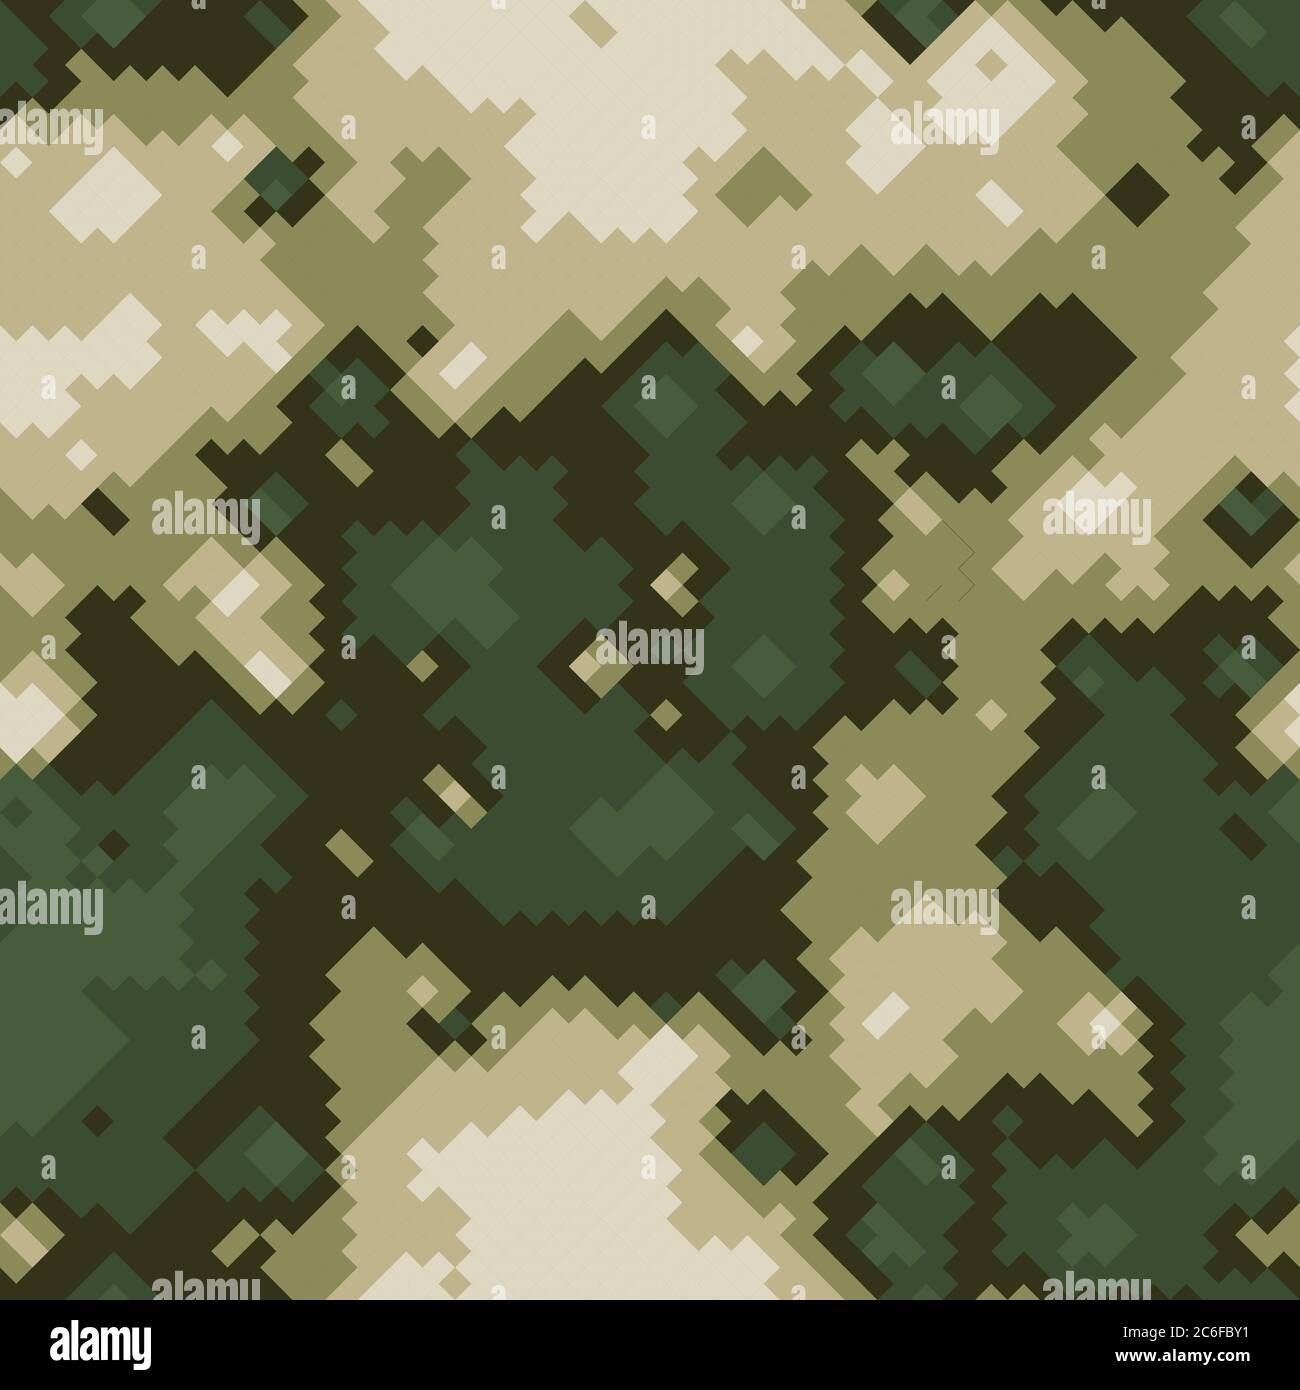 Seamless digital mountain pixel camo texture for army or hunting